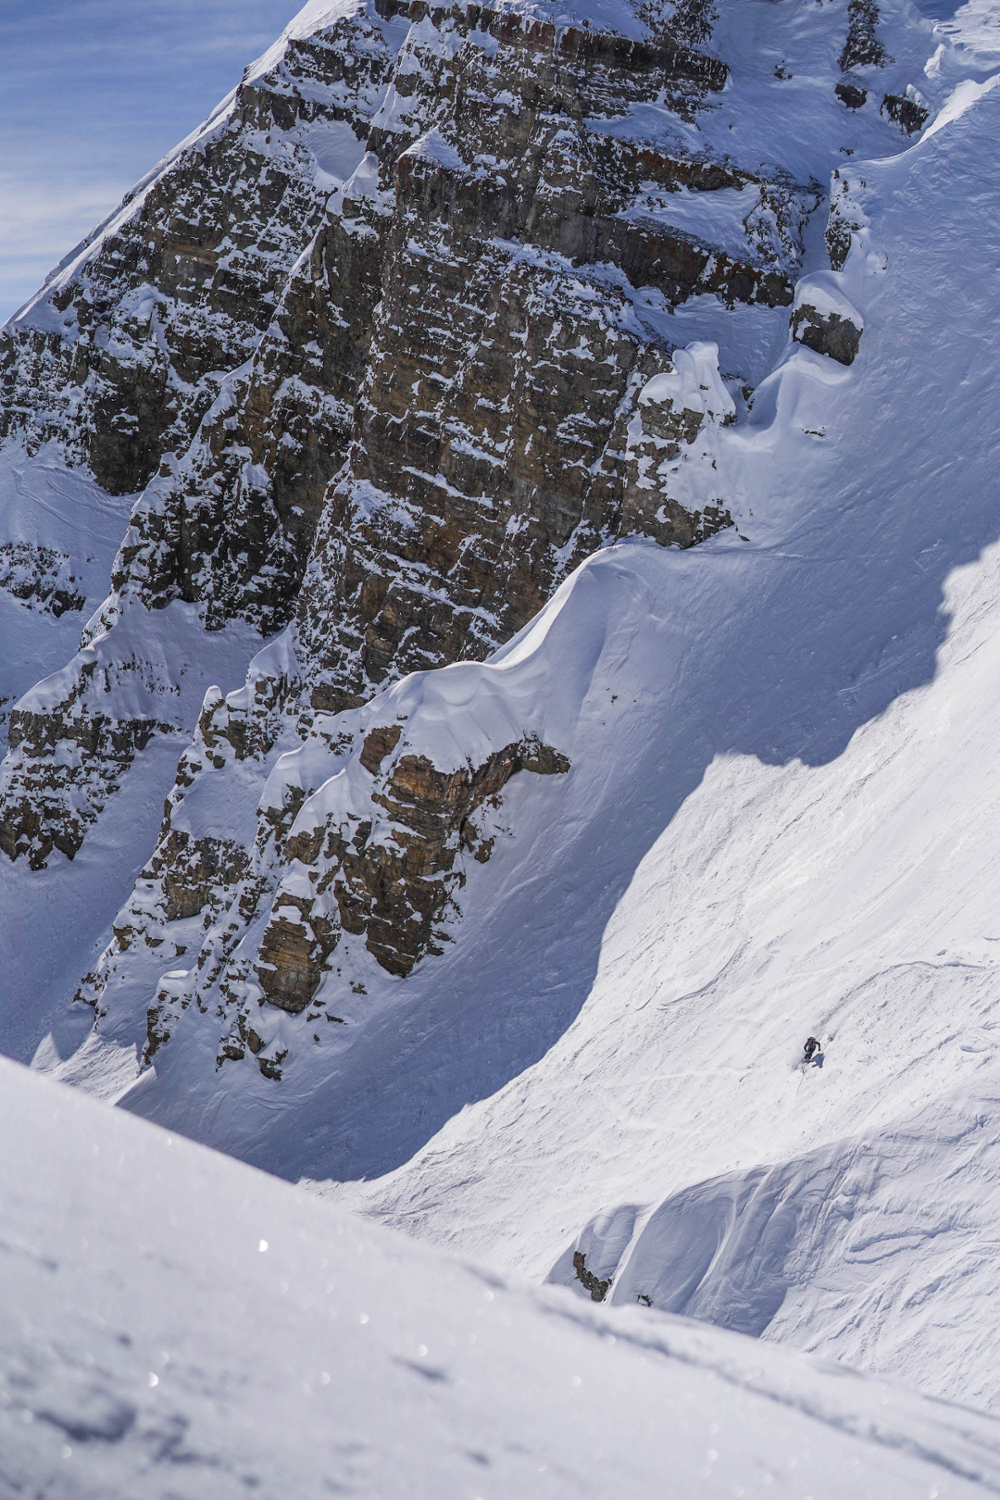 This photo of Patty Owe arcing a turn in the Cody Peak backcountry area was taken in March of 2019 during Spring Break. Cody Peak lies directly adjacent to Grant Teton National Park, and is less than 100 miles from Yellowstone. While it faces the threat of a shorter ski season, this region also faces potentially massive exploitation of oil and gas resources. Opening up our national parks to oil and gas drilling is a tragic move, and puts some of our last wild places at risk of exploitation and degradation on extreme levels. <span class="cc-gallery-credit">[Andrew Hildenbrand • f1.8, 1/800 sec, ISO 80 • Outdoor Recreation]</span>